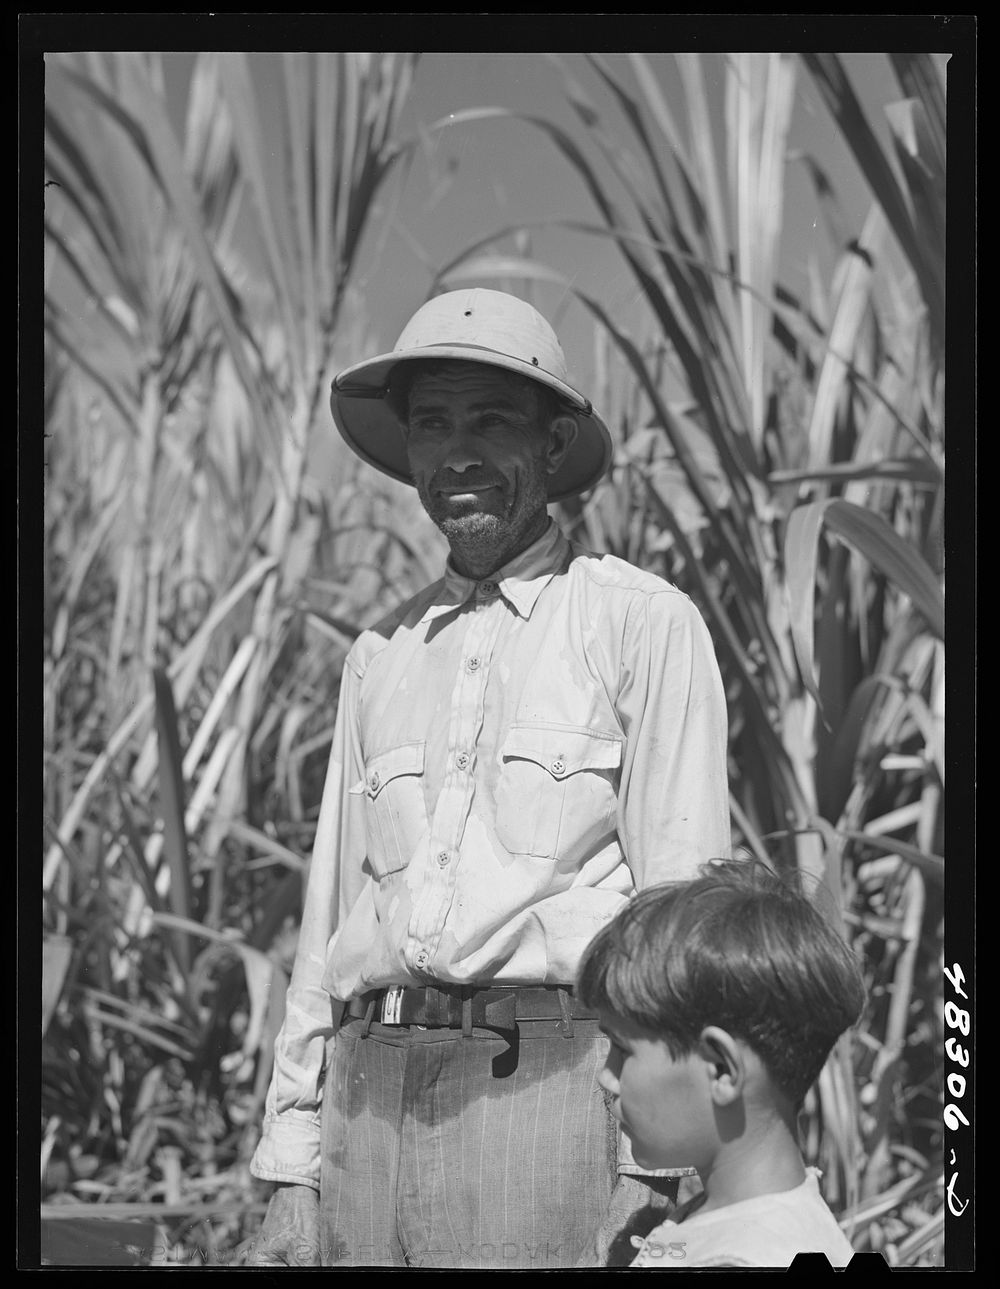 [Untitled photo, possibly related to: Rio Piedras (vicinity), Puerto Rico. Union organizer who was visiting a FSA (Farm…